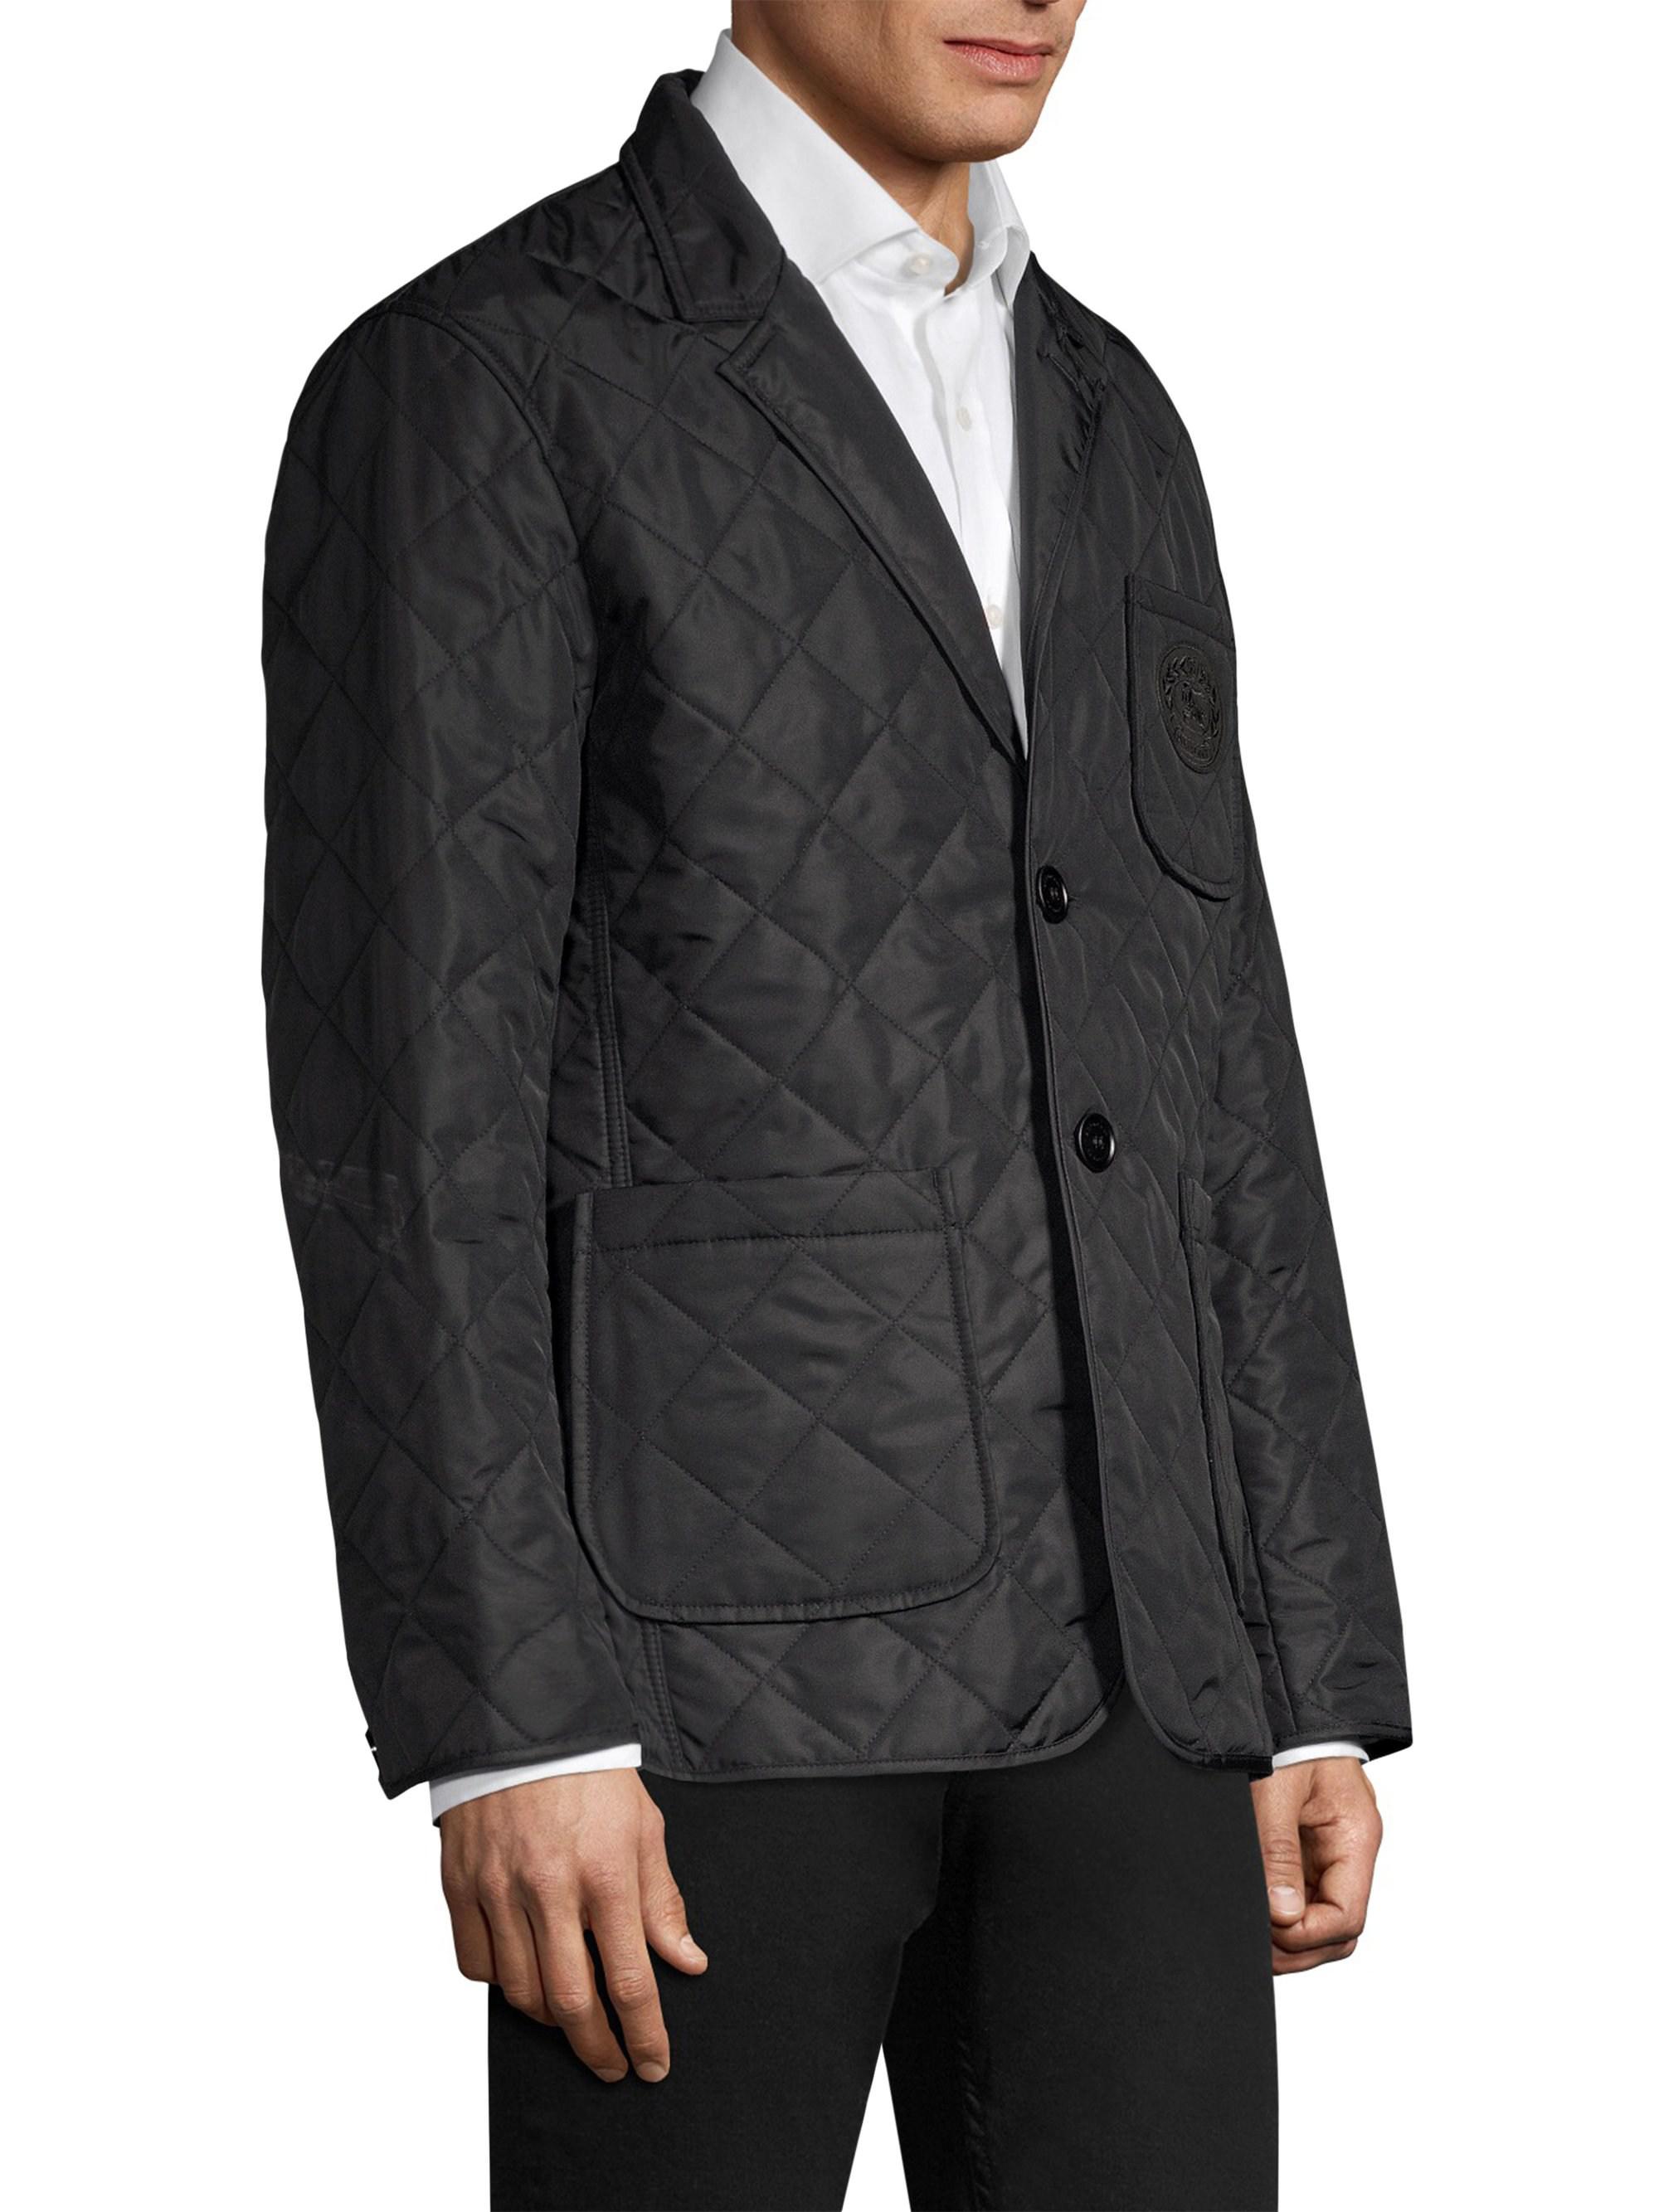 Burberry Synthetic Clifton Quilted Jacket in Black for Men - Lyst